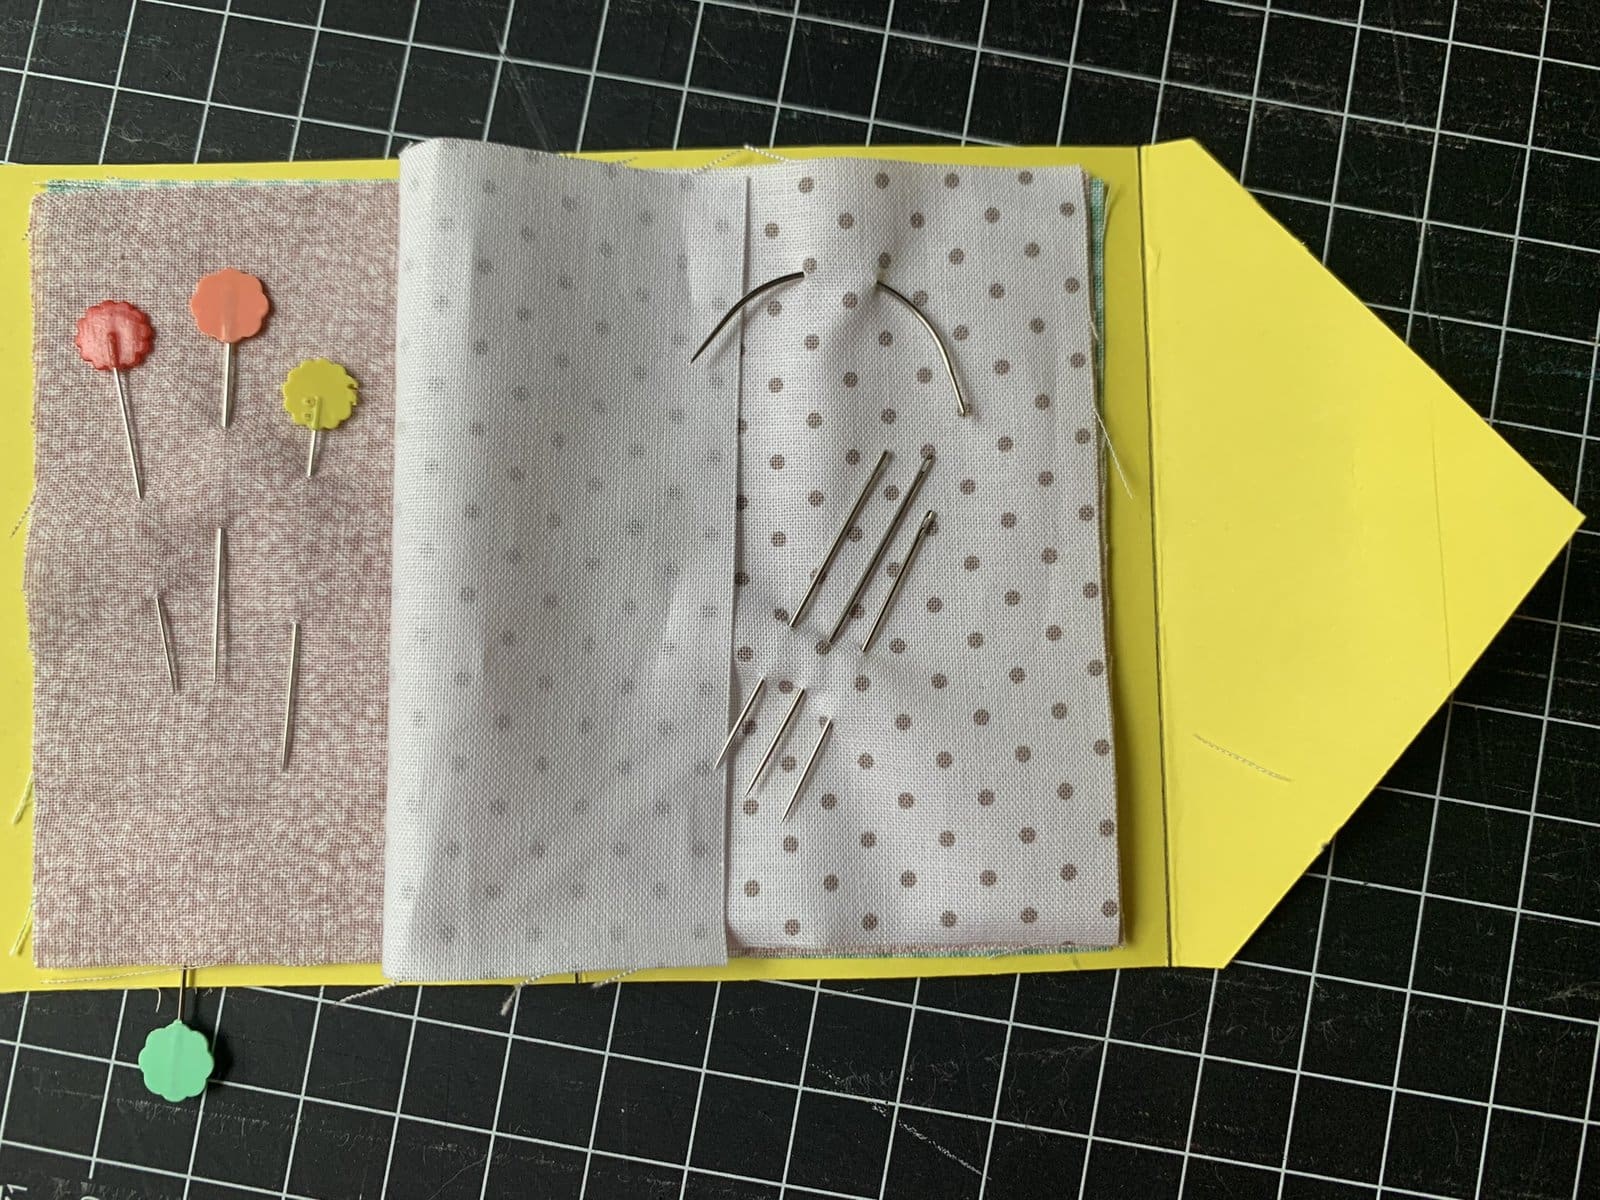 image description: a needle book, open on a table; it's made of a cardstock cover and fabric pages, and a few needles and pins are clipped into the pages